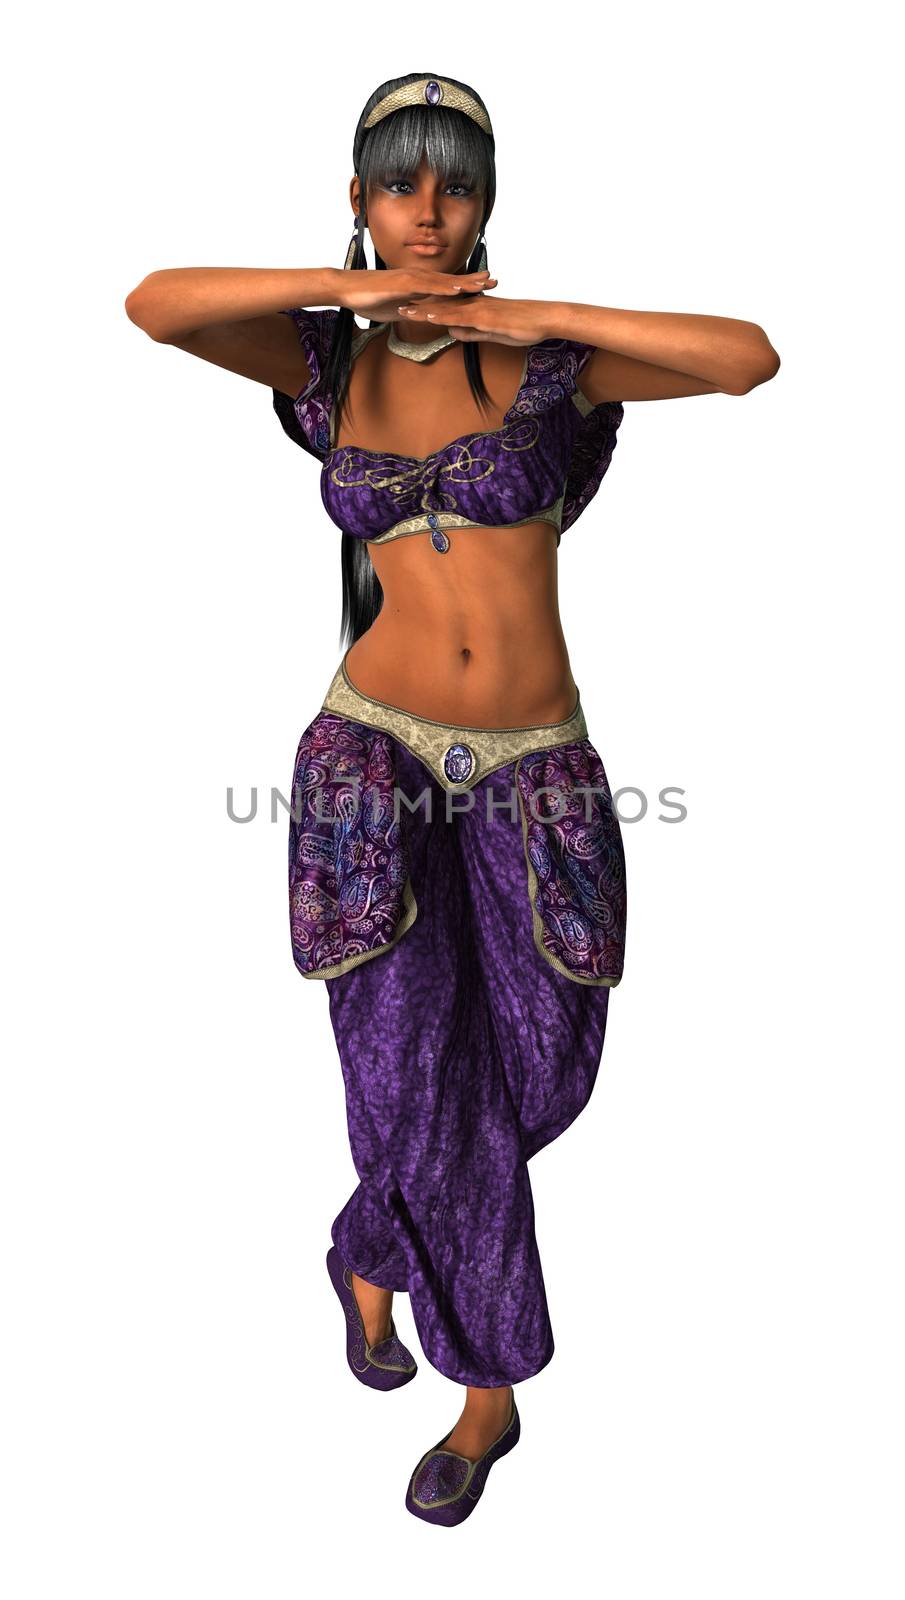 3D digital render of a beautiful belly dancer isolated on white background